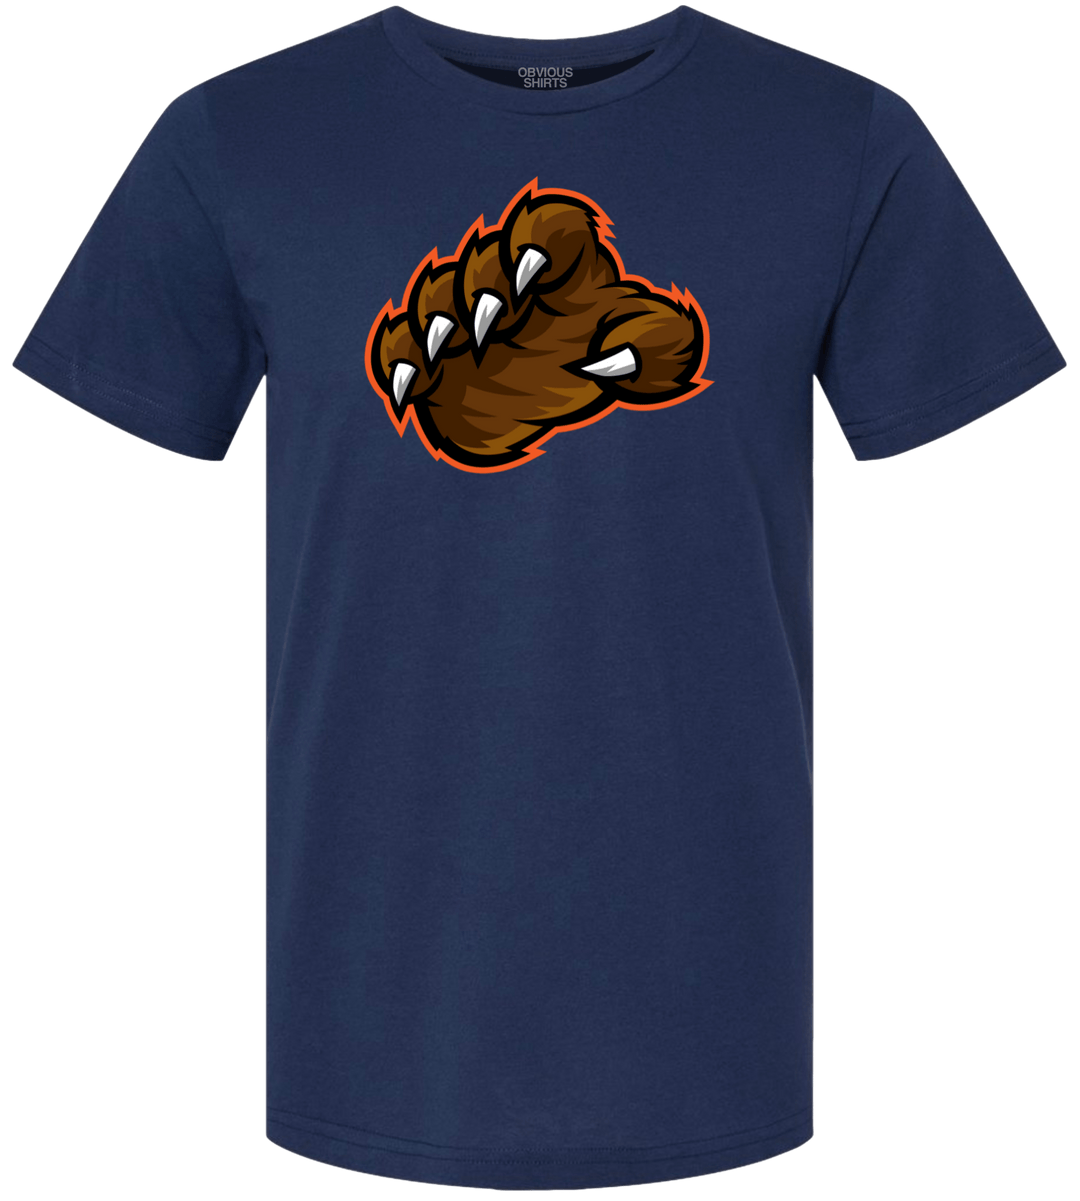 THE CLAW. - OBVIOUS SHIRTS